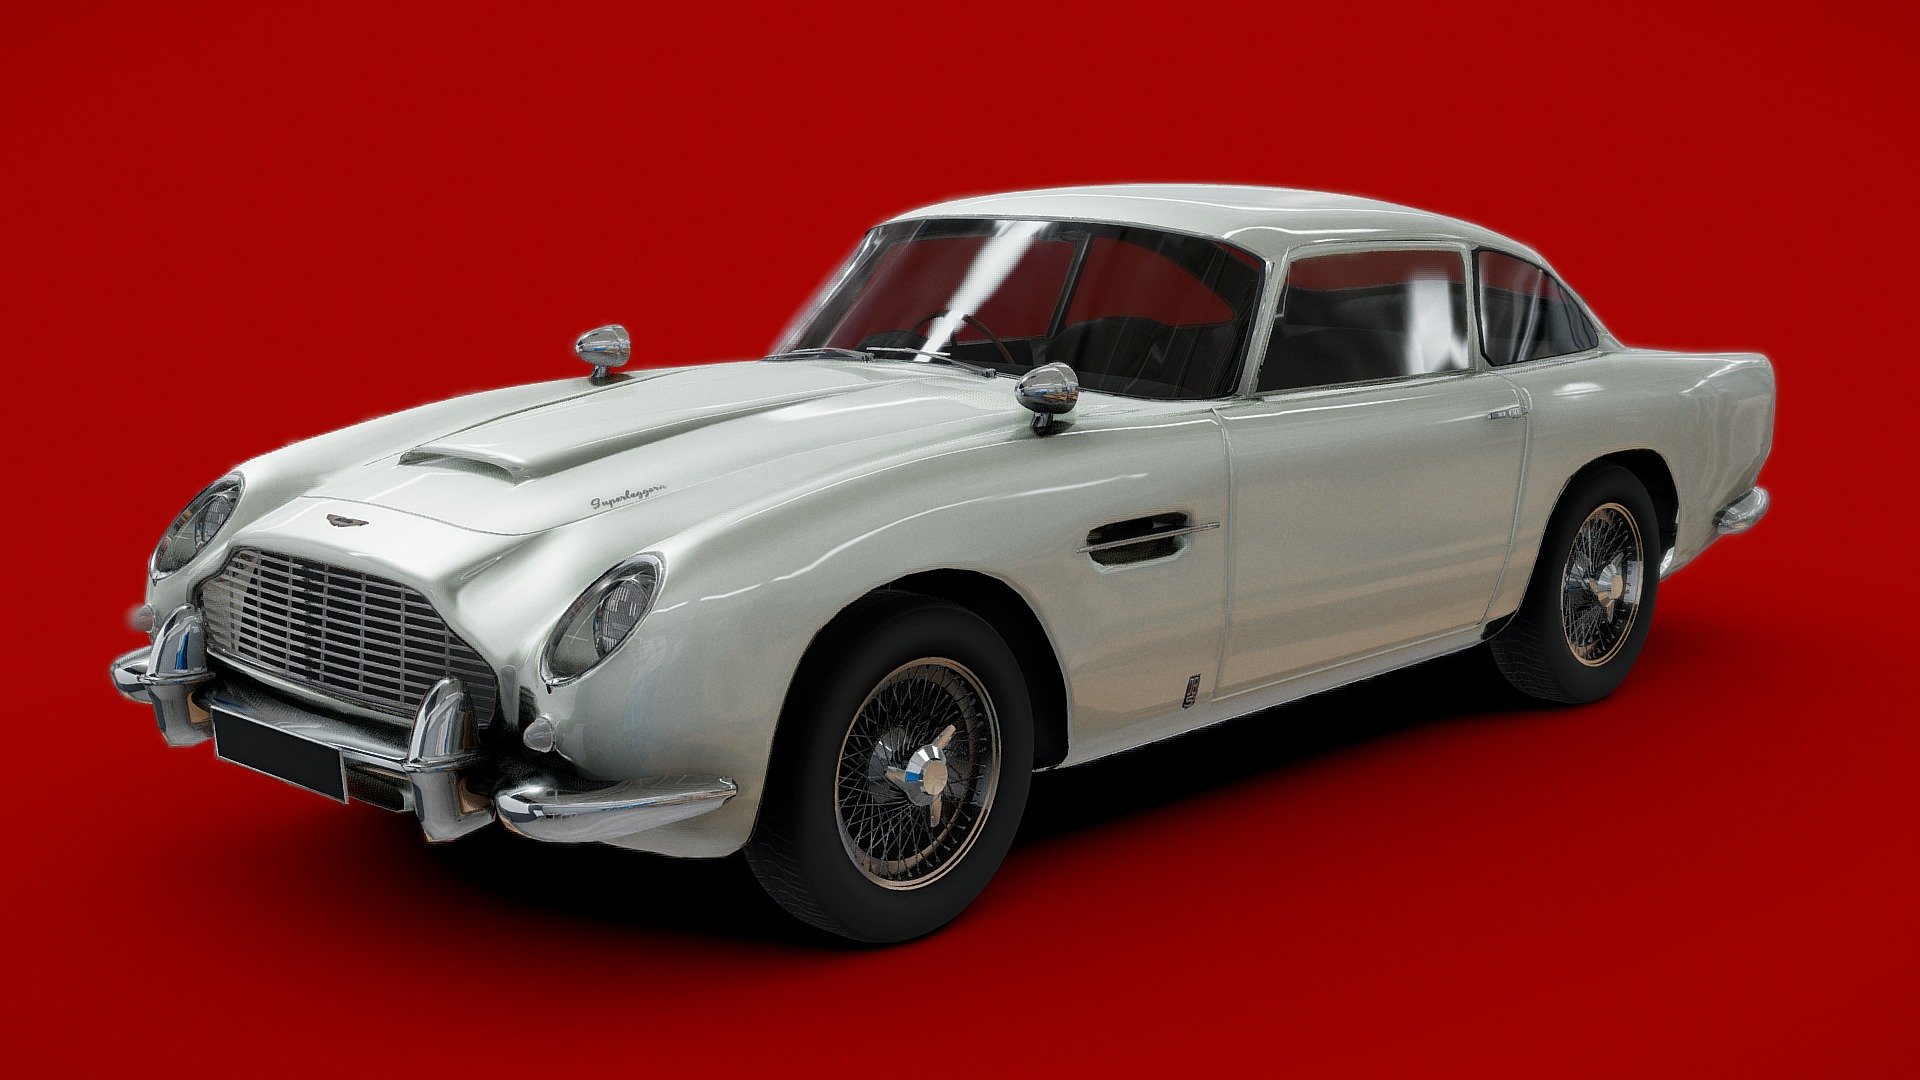 **3d car model of Aston Martin DB5

fully editable / rigable / interiour

by getting this model you have full control on meshes and materials

you can even subdivide all parts in blneder for having better looking details.

you can support me by folowing me on instagram

my ig: ZIRODESIGN - Aston Martin DB5 - Buy Royalty Free 3D model by ZIRODESIGN 3d model